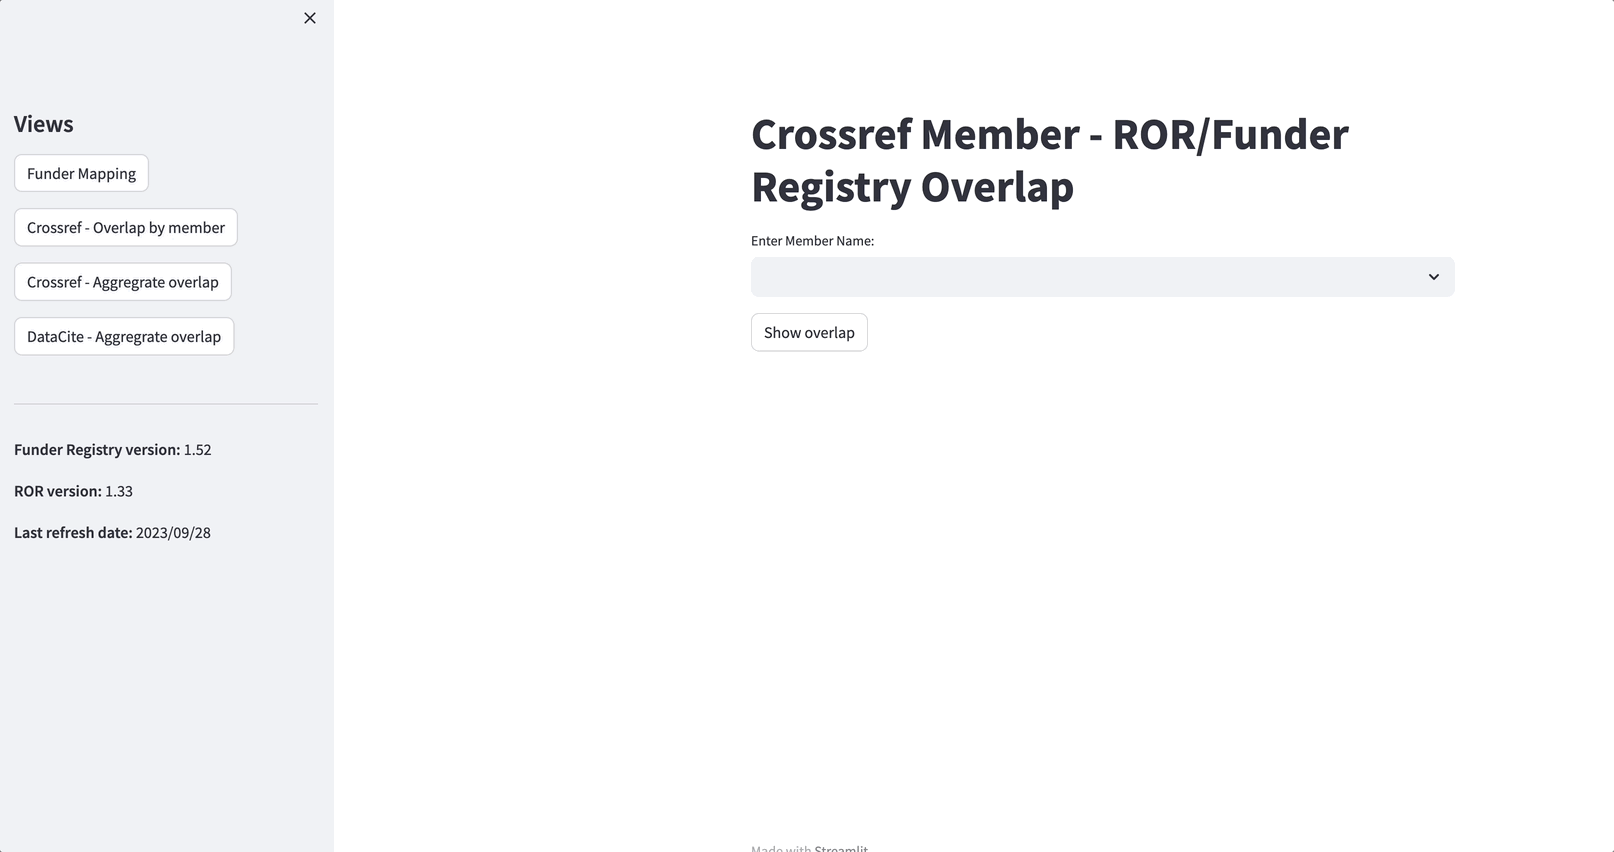 GIF showing how to look up the Crossref member Royal Society of Chemistry in the ROR / Funder Registry Overlap tool